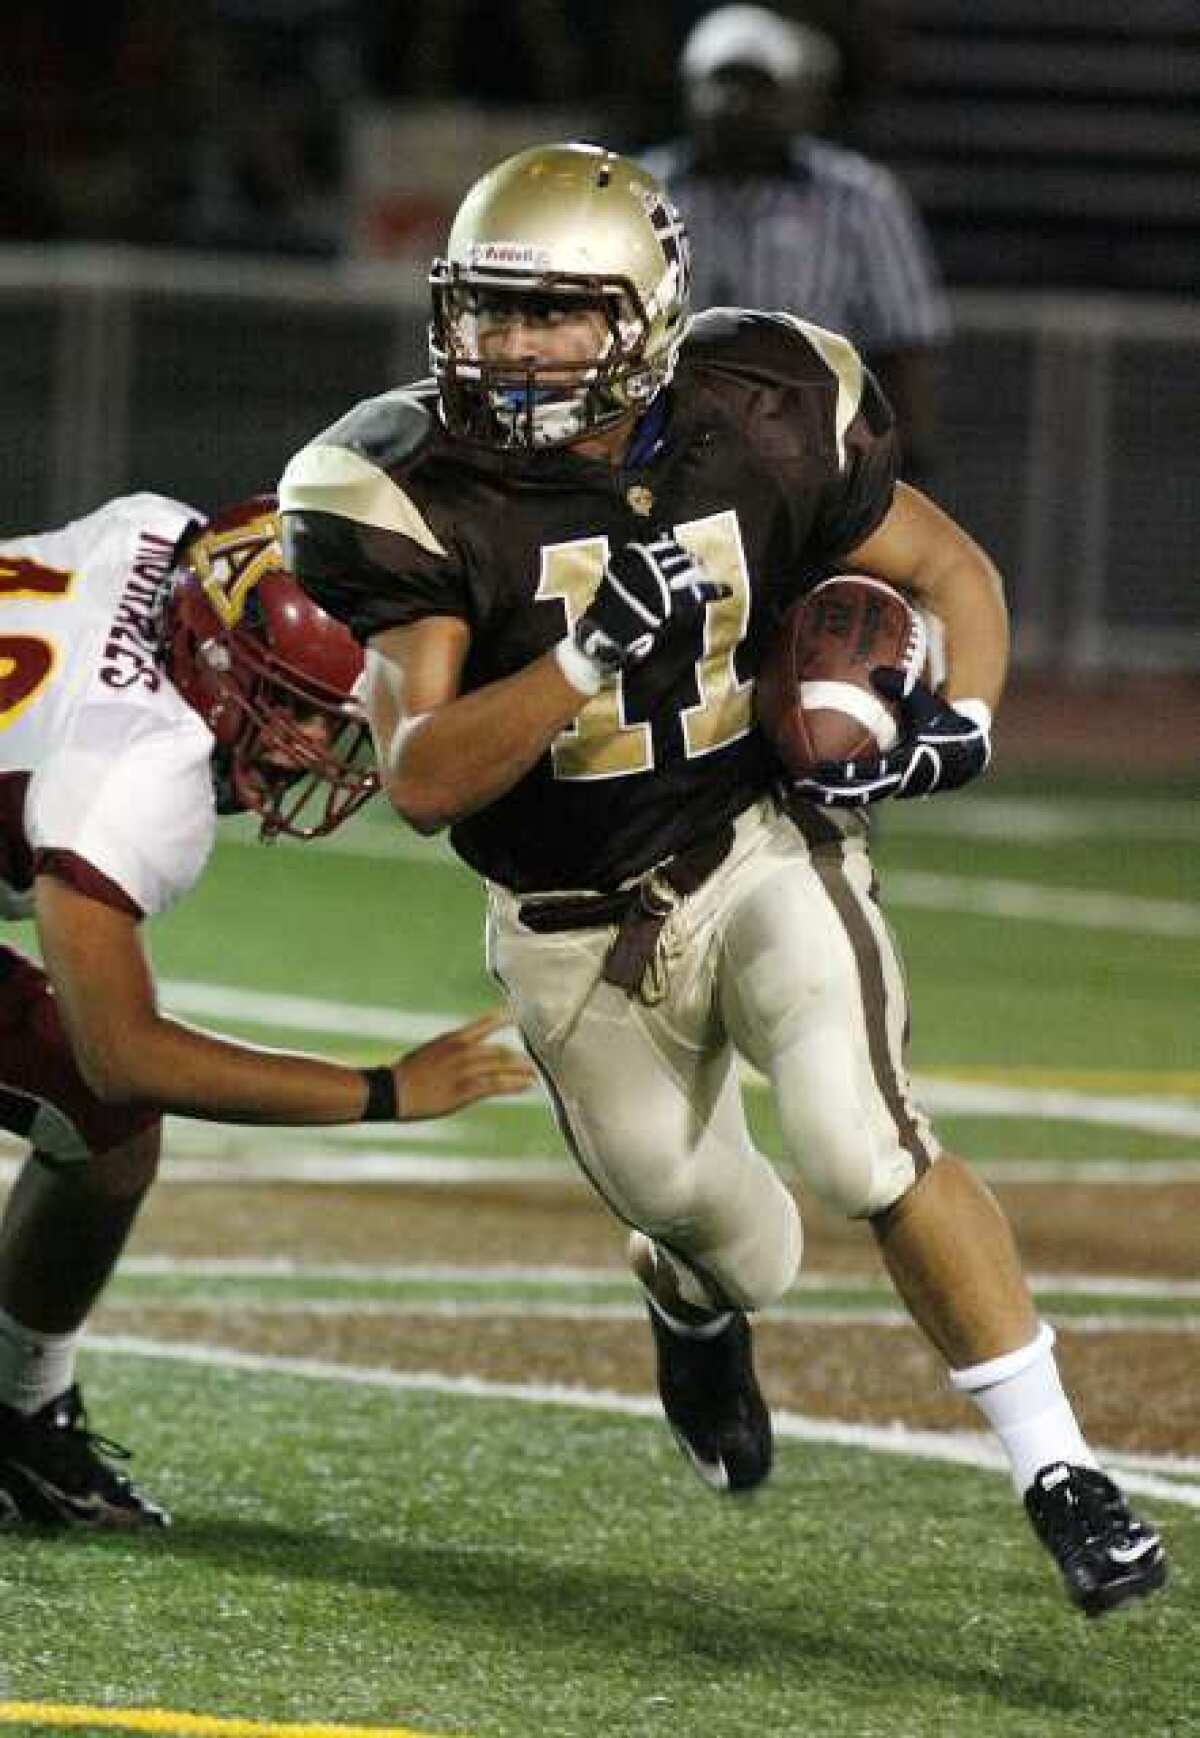 St. Francis' Daniel Kawamura carries the ball in the first quarter against Arcadia.